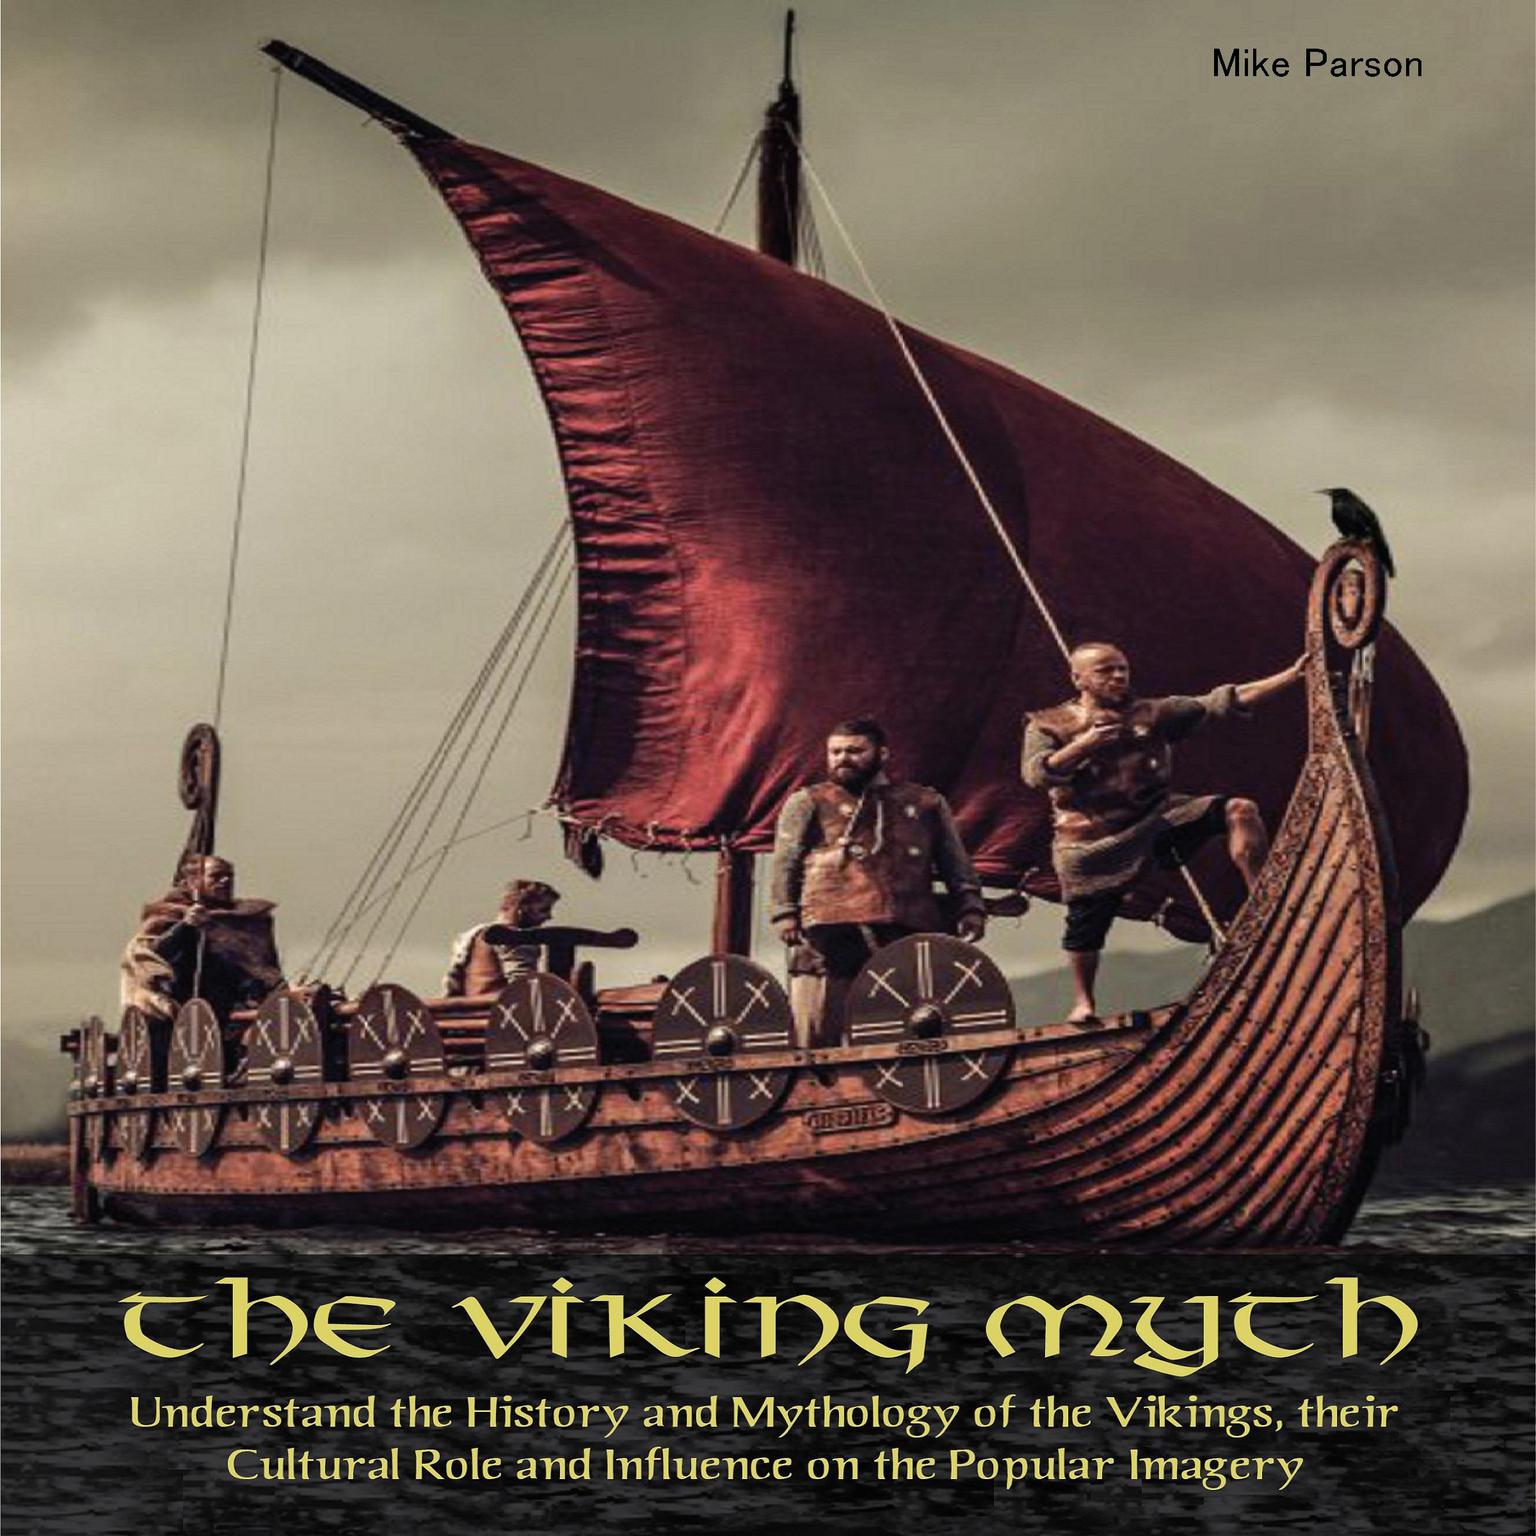 The Viking Myth: Understanding Vikings’ History and Mythology, their Cultural Role and Influence on the Popular Imagery Audiobook, by Mike Parson